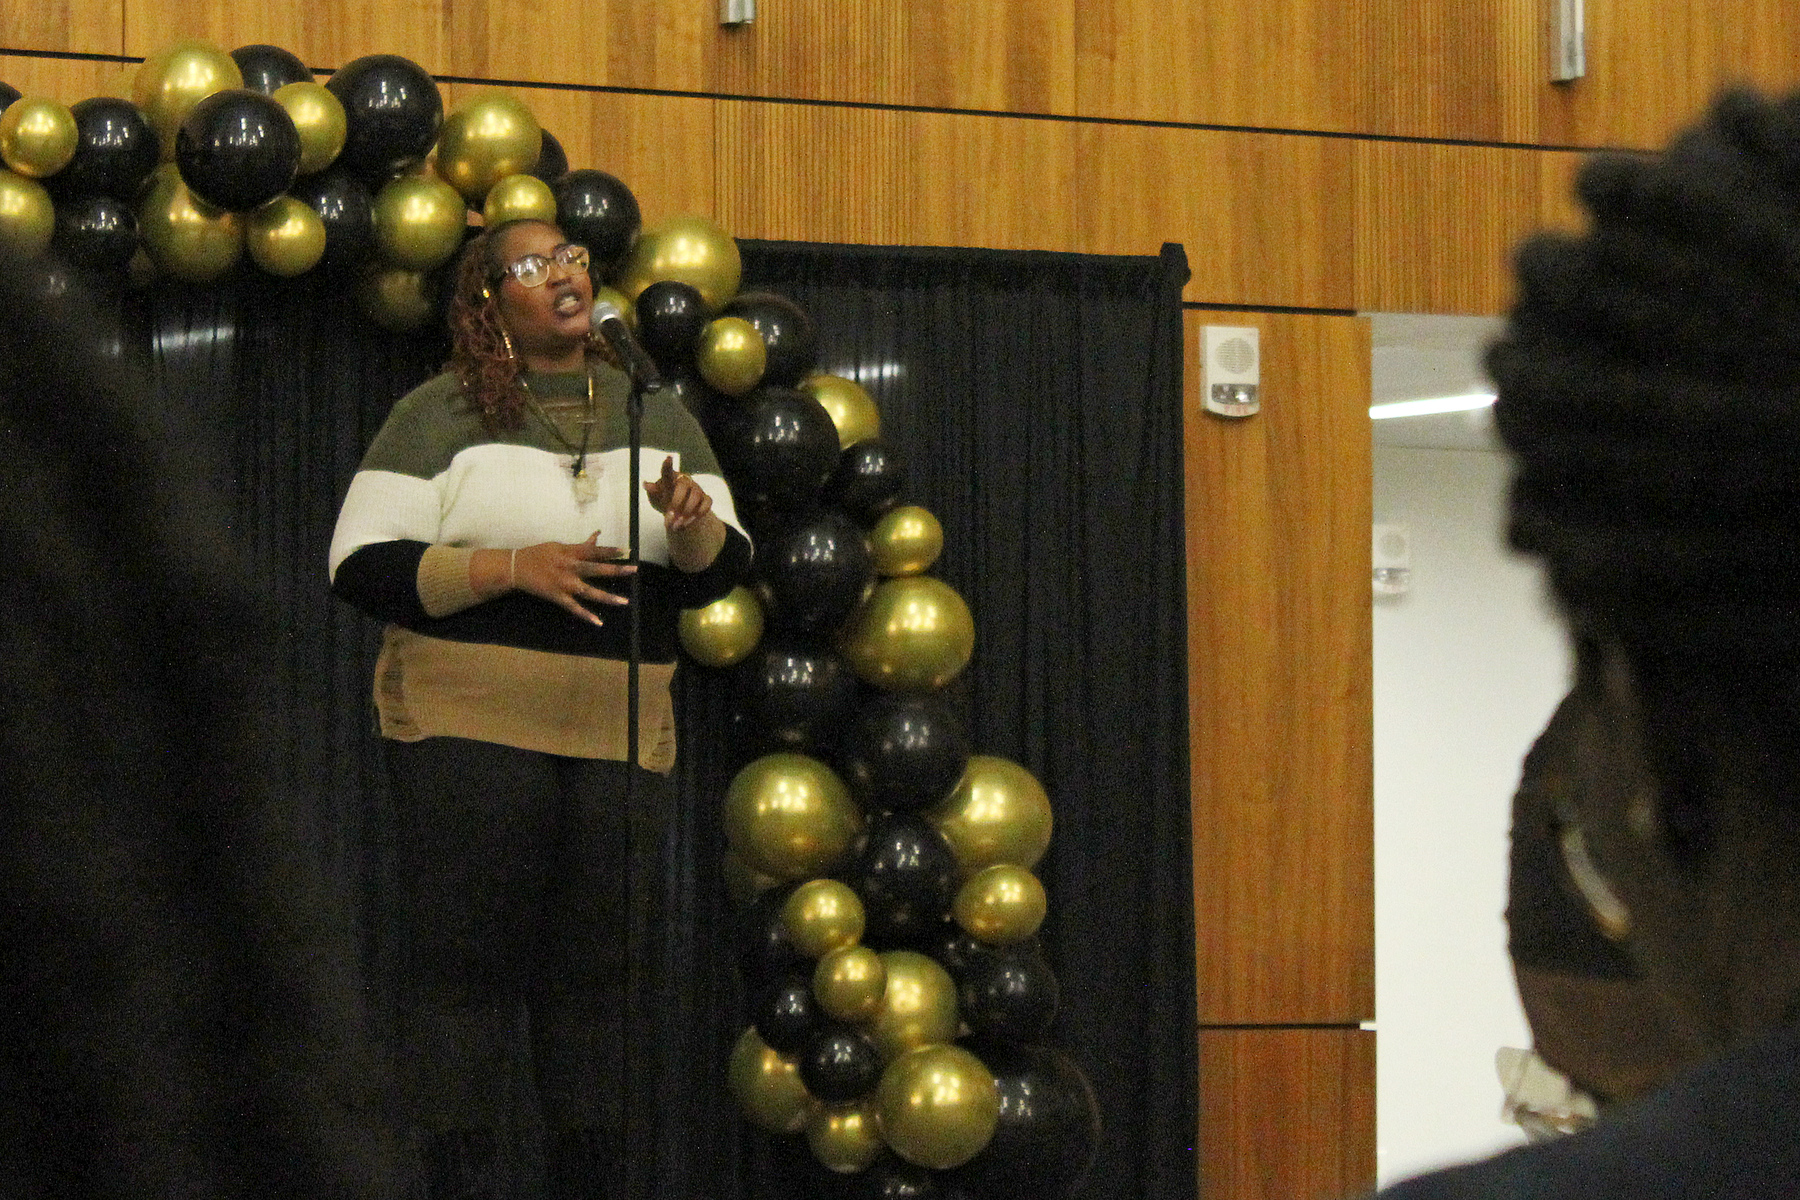 Oswego's Martin Luther King, Jr. celebration week included a new event Feb. 2 held in the Shineman Center Nucleus. This celebration featured special guest Emmy-nominated poet Jillian Hanesworth reading poetry and hosting an art exhibit.